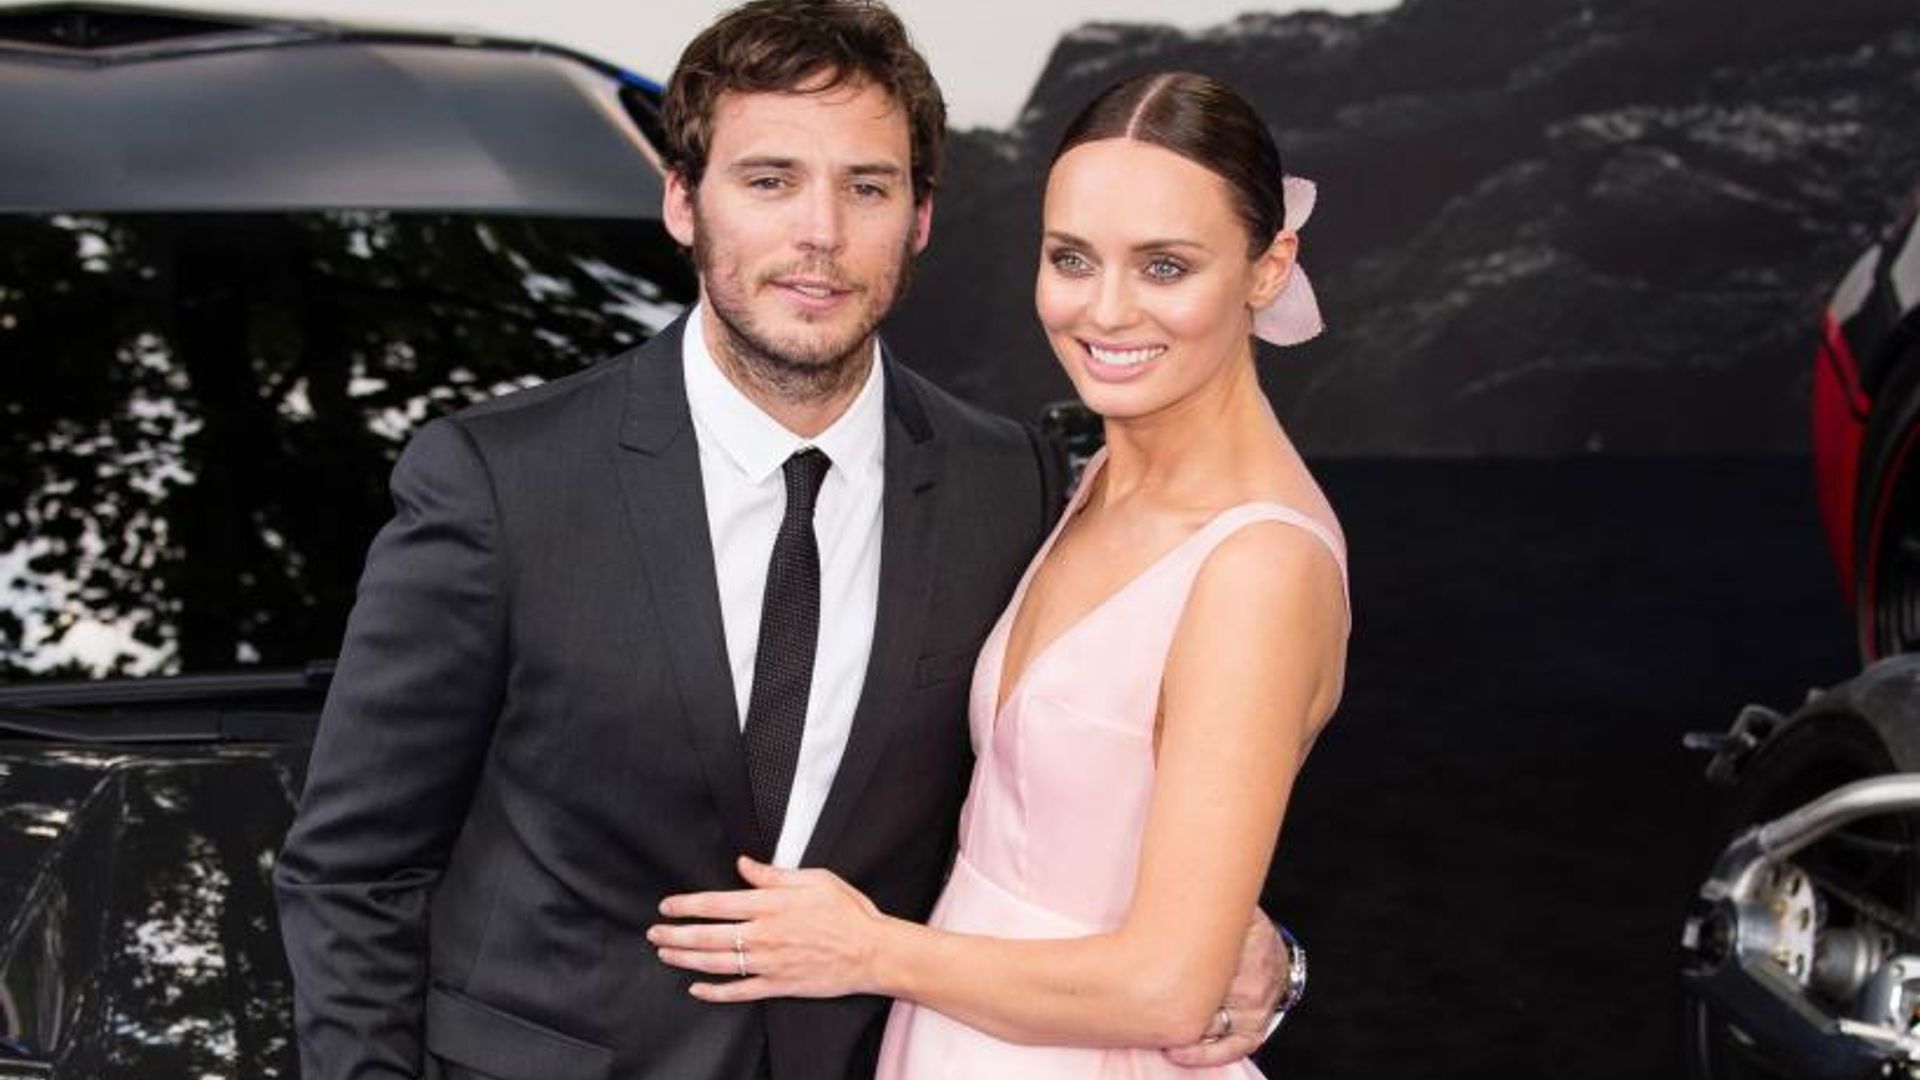 sam claflin at transformers premiere with wife laura haddock